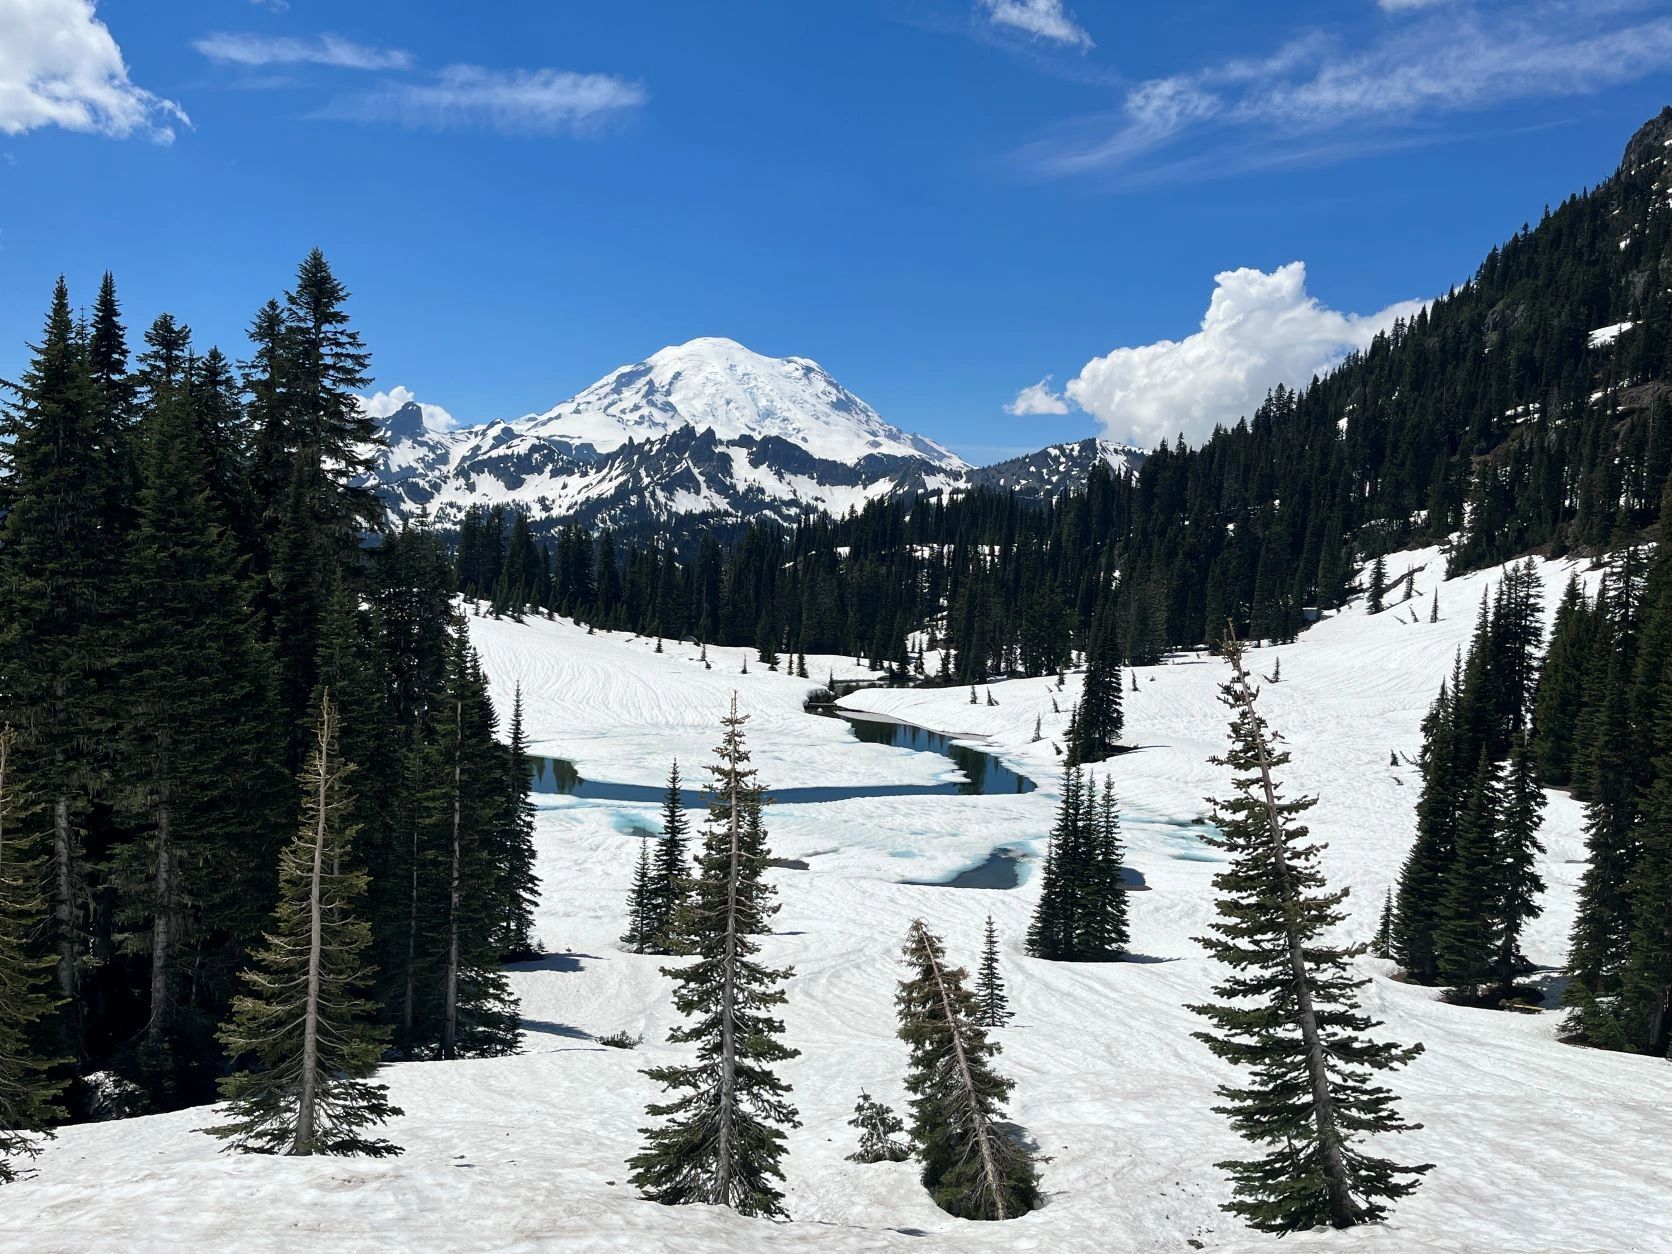 A Day Trip to Mount Rainier National Park - Stories My Suitcase Could Tell